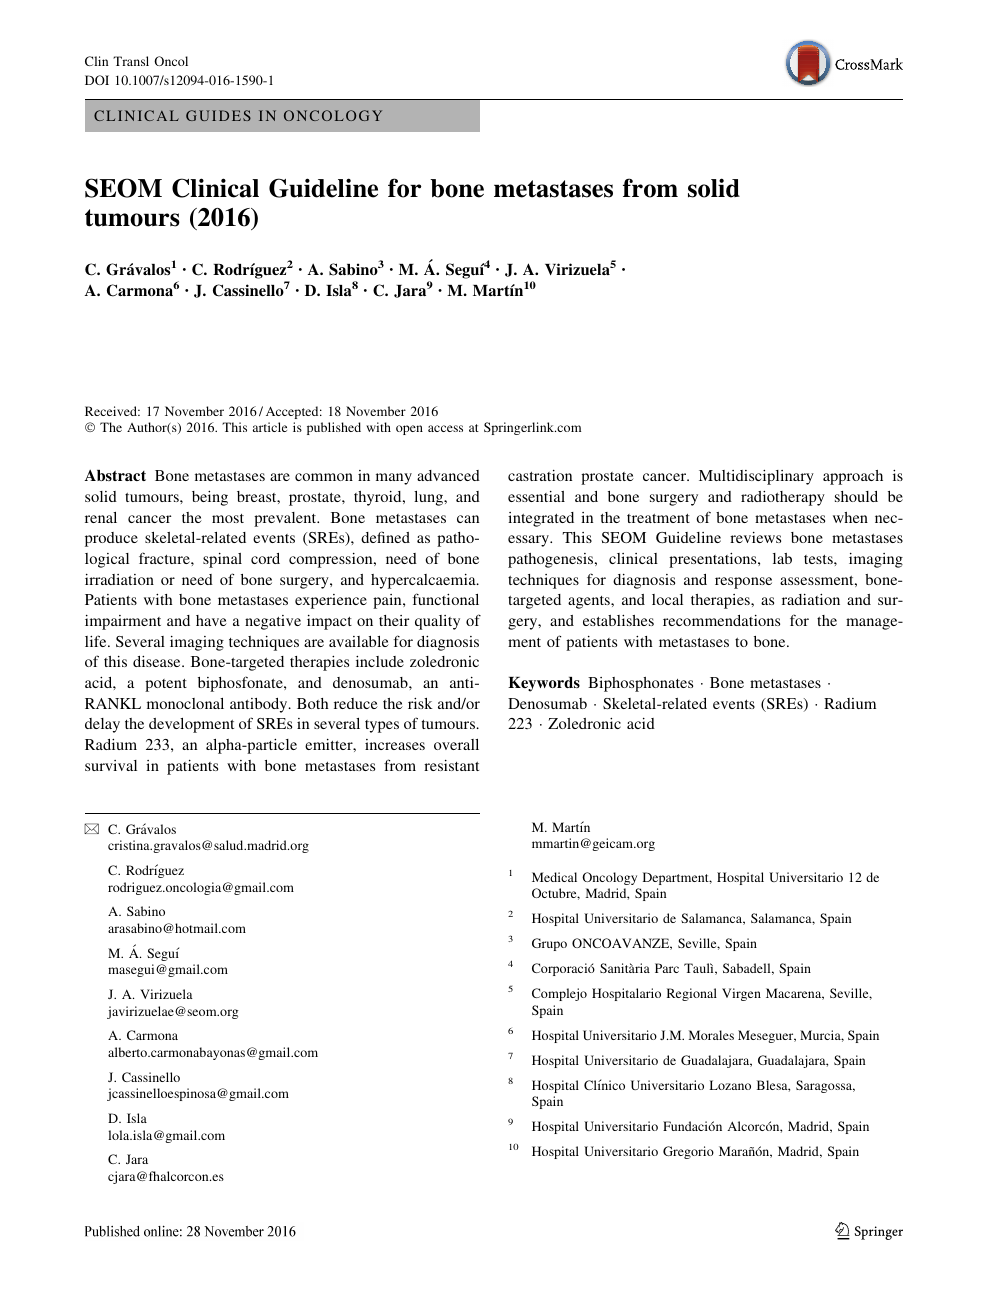 Seom Clinical Guideline For Bone Metastases From Solid Tumours 2016 Topic Of Research Paper In Clinical Medicine Download Scholarly Article Pdf And Read For Free On Cyberleninka Open Science Hub